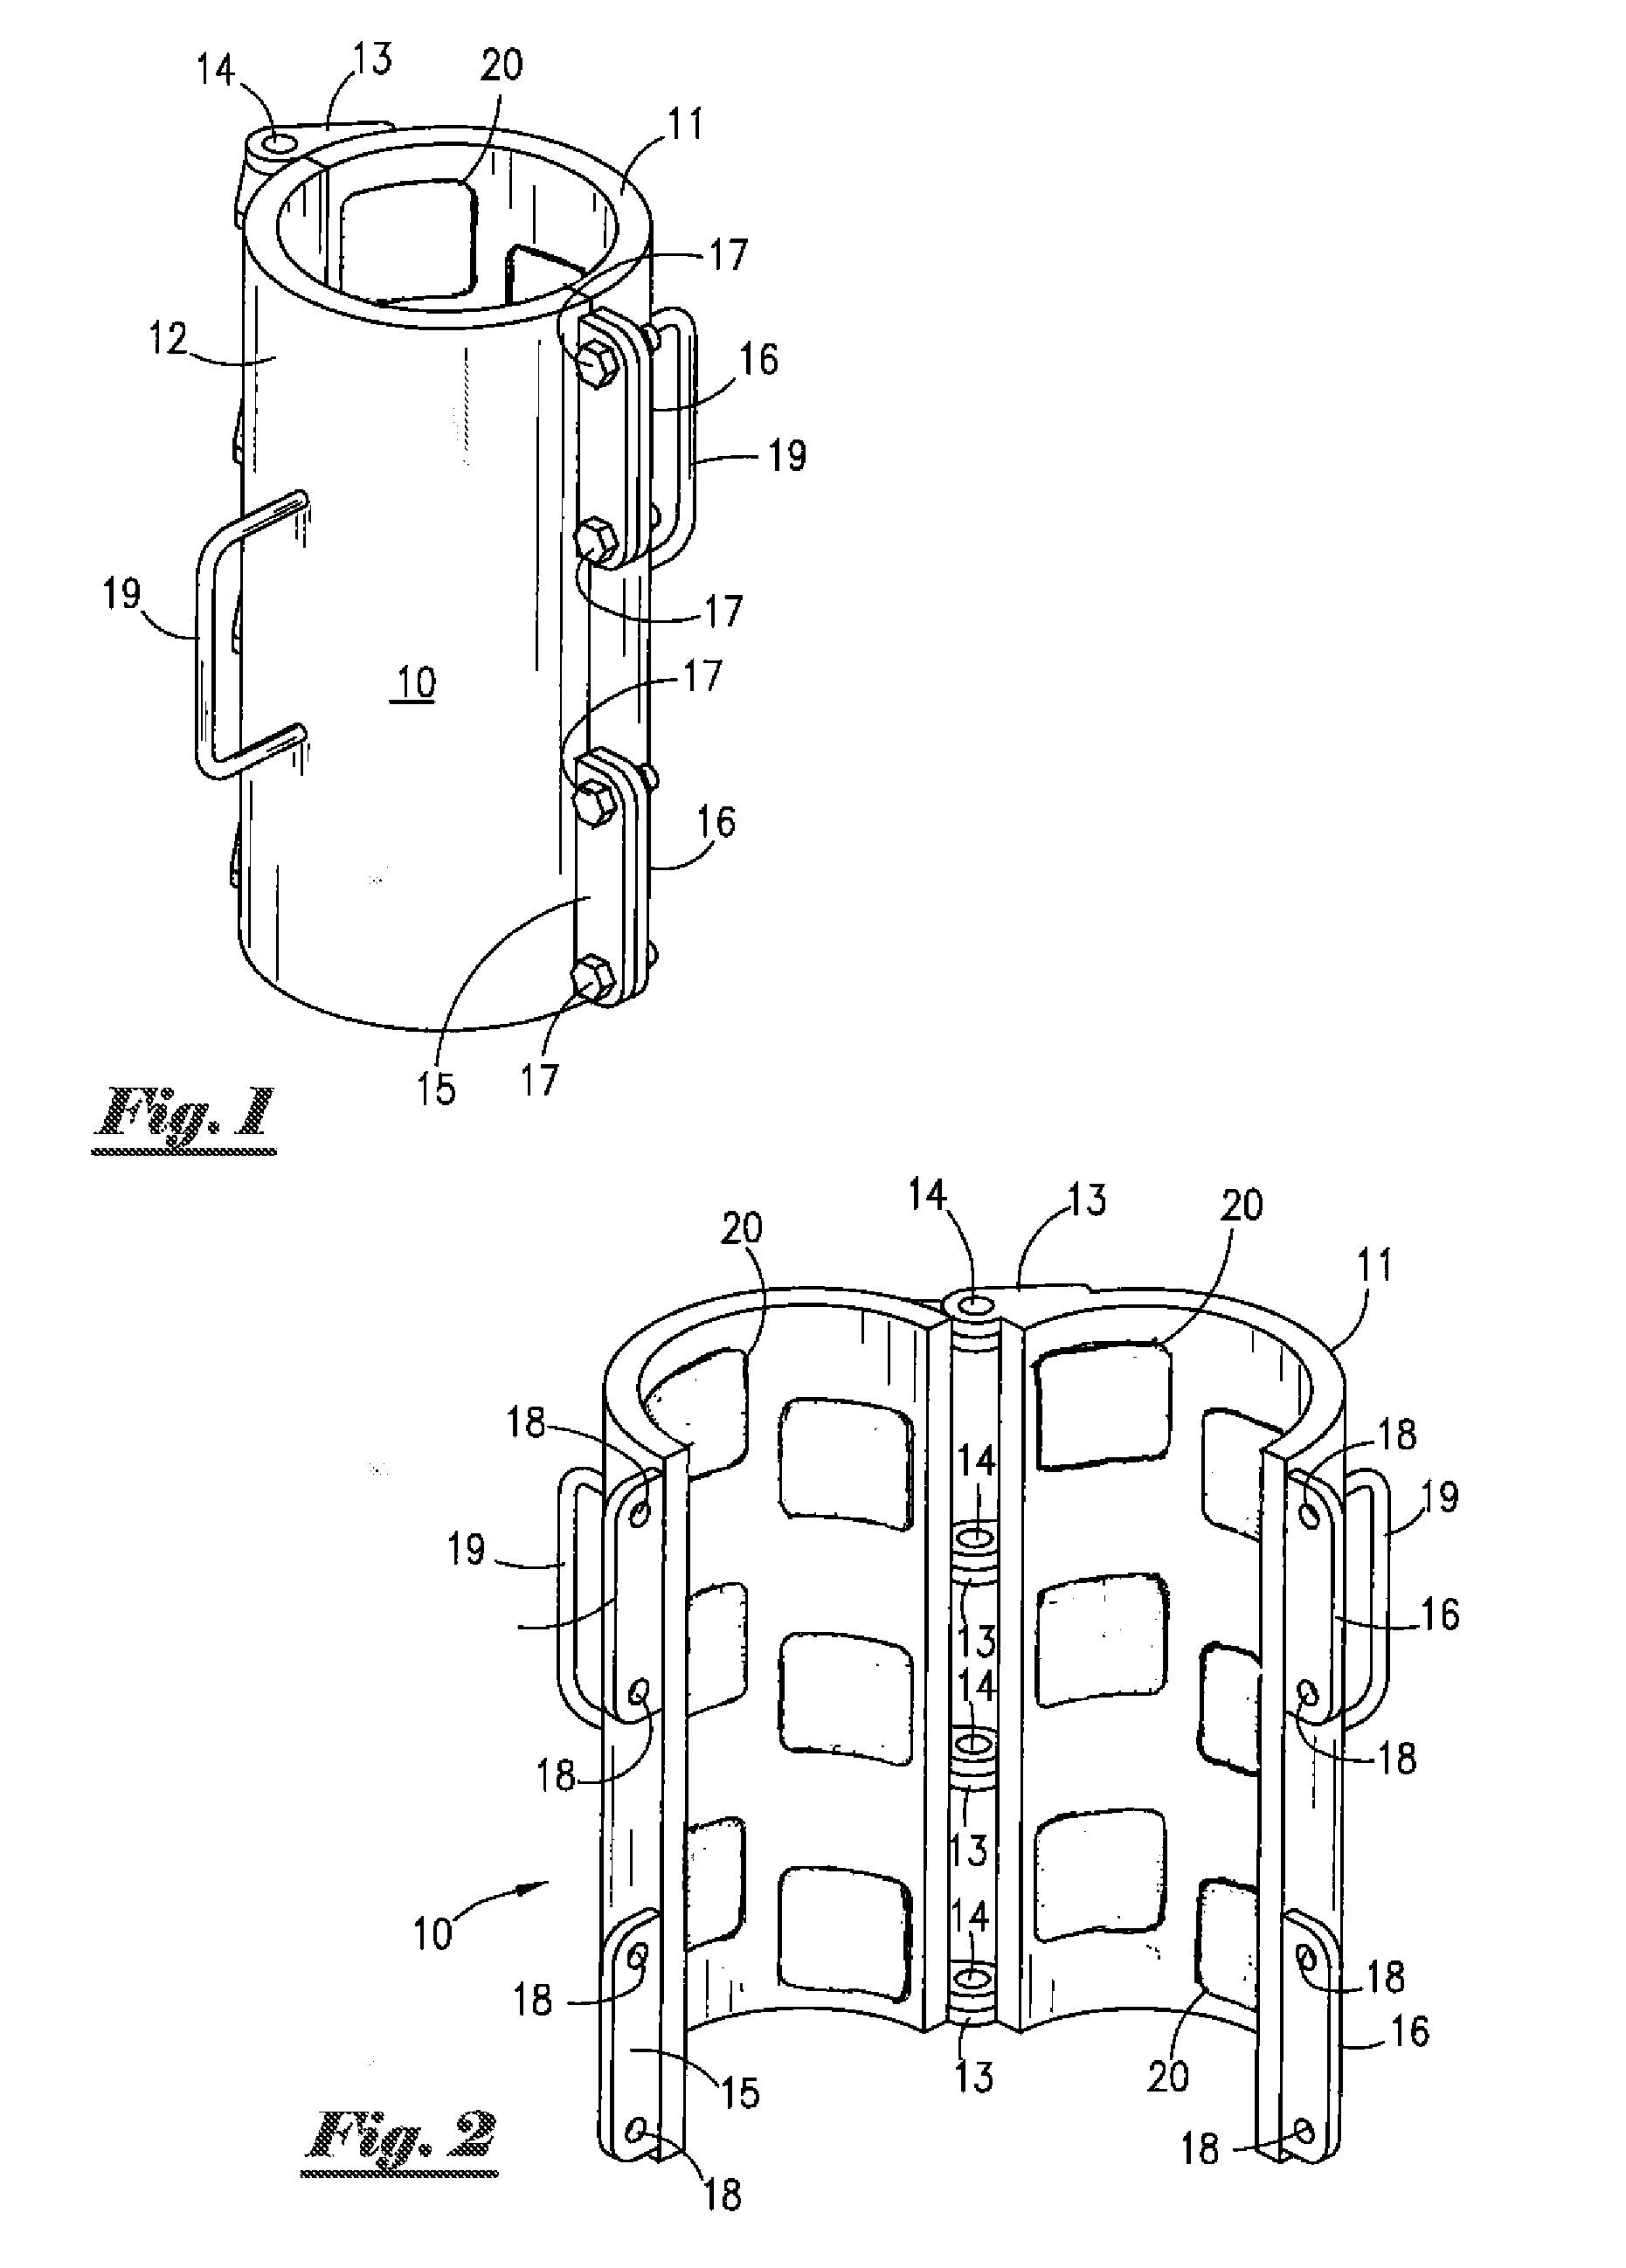 Method and Apparatus for Catching and Retrieving Objects in a Well